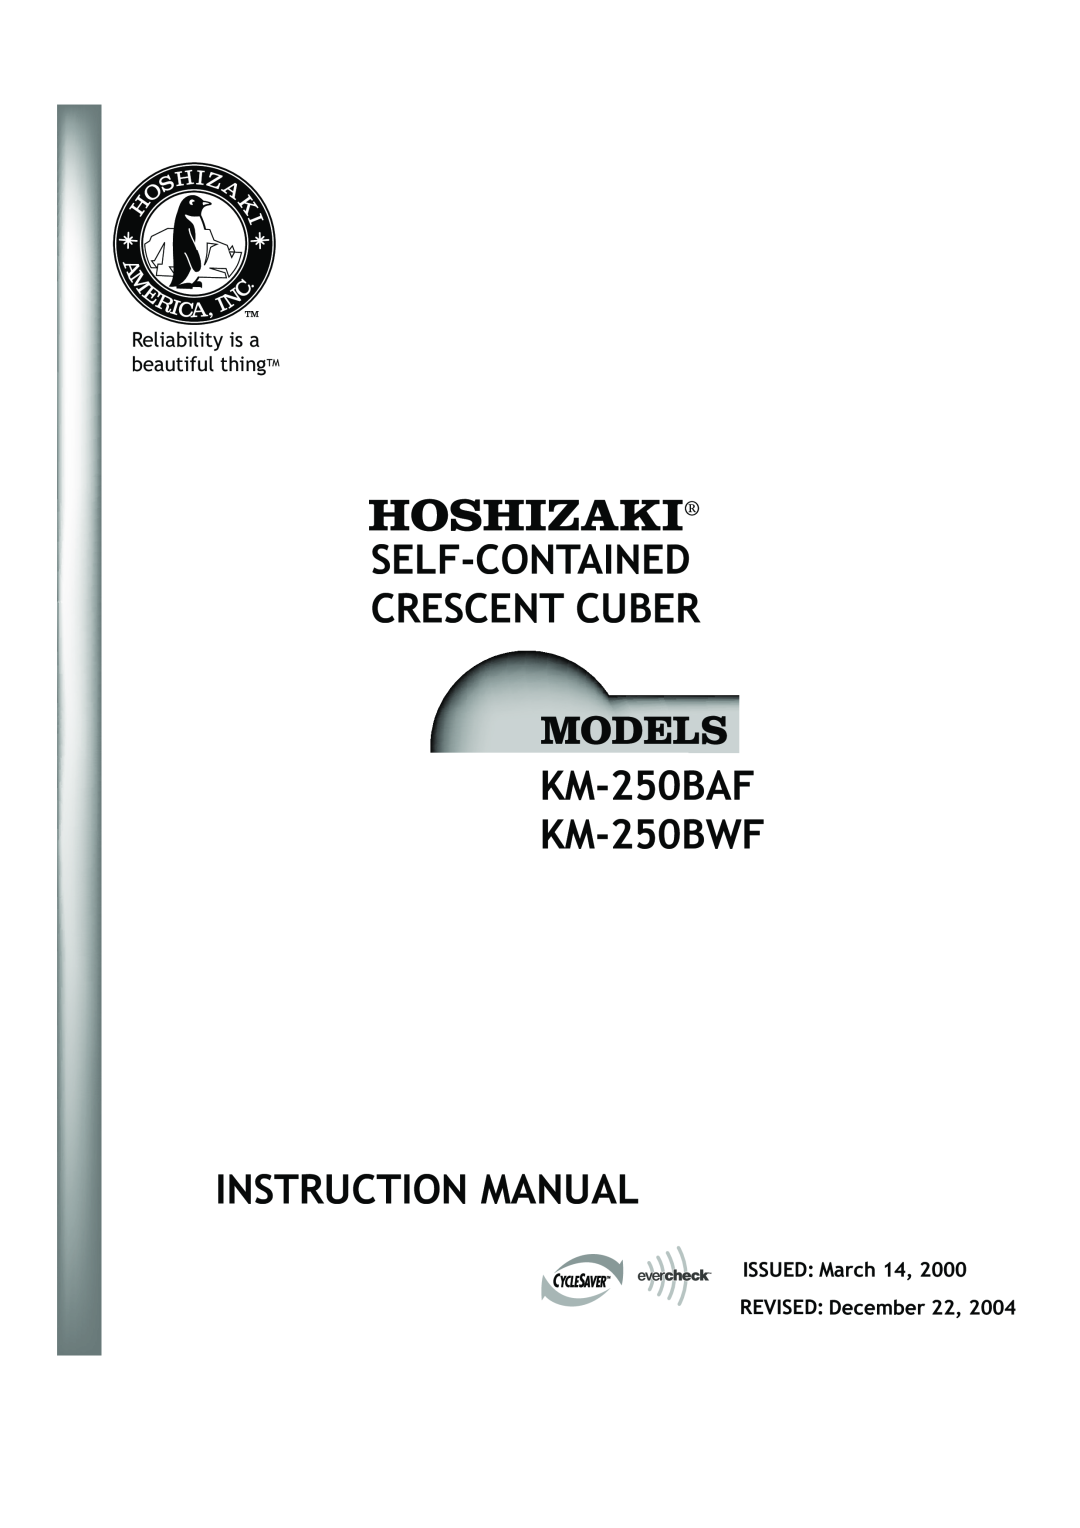 Hoshizaki instruction manual SELF-CONTAINED CRESCENT CUBER KM-250BAF KM-250BWF, Reliability is a beautiful thingTM 